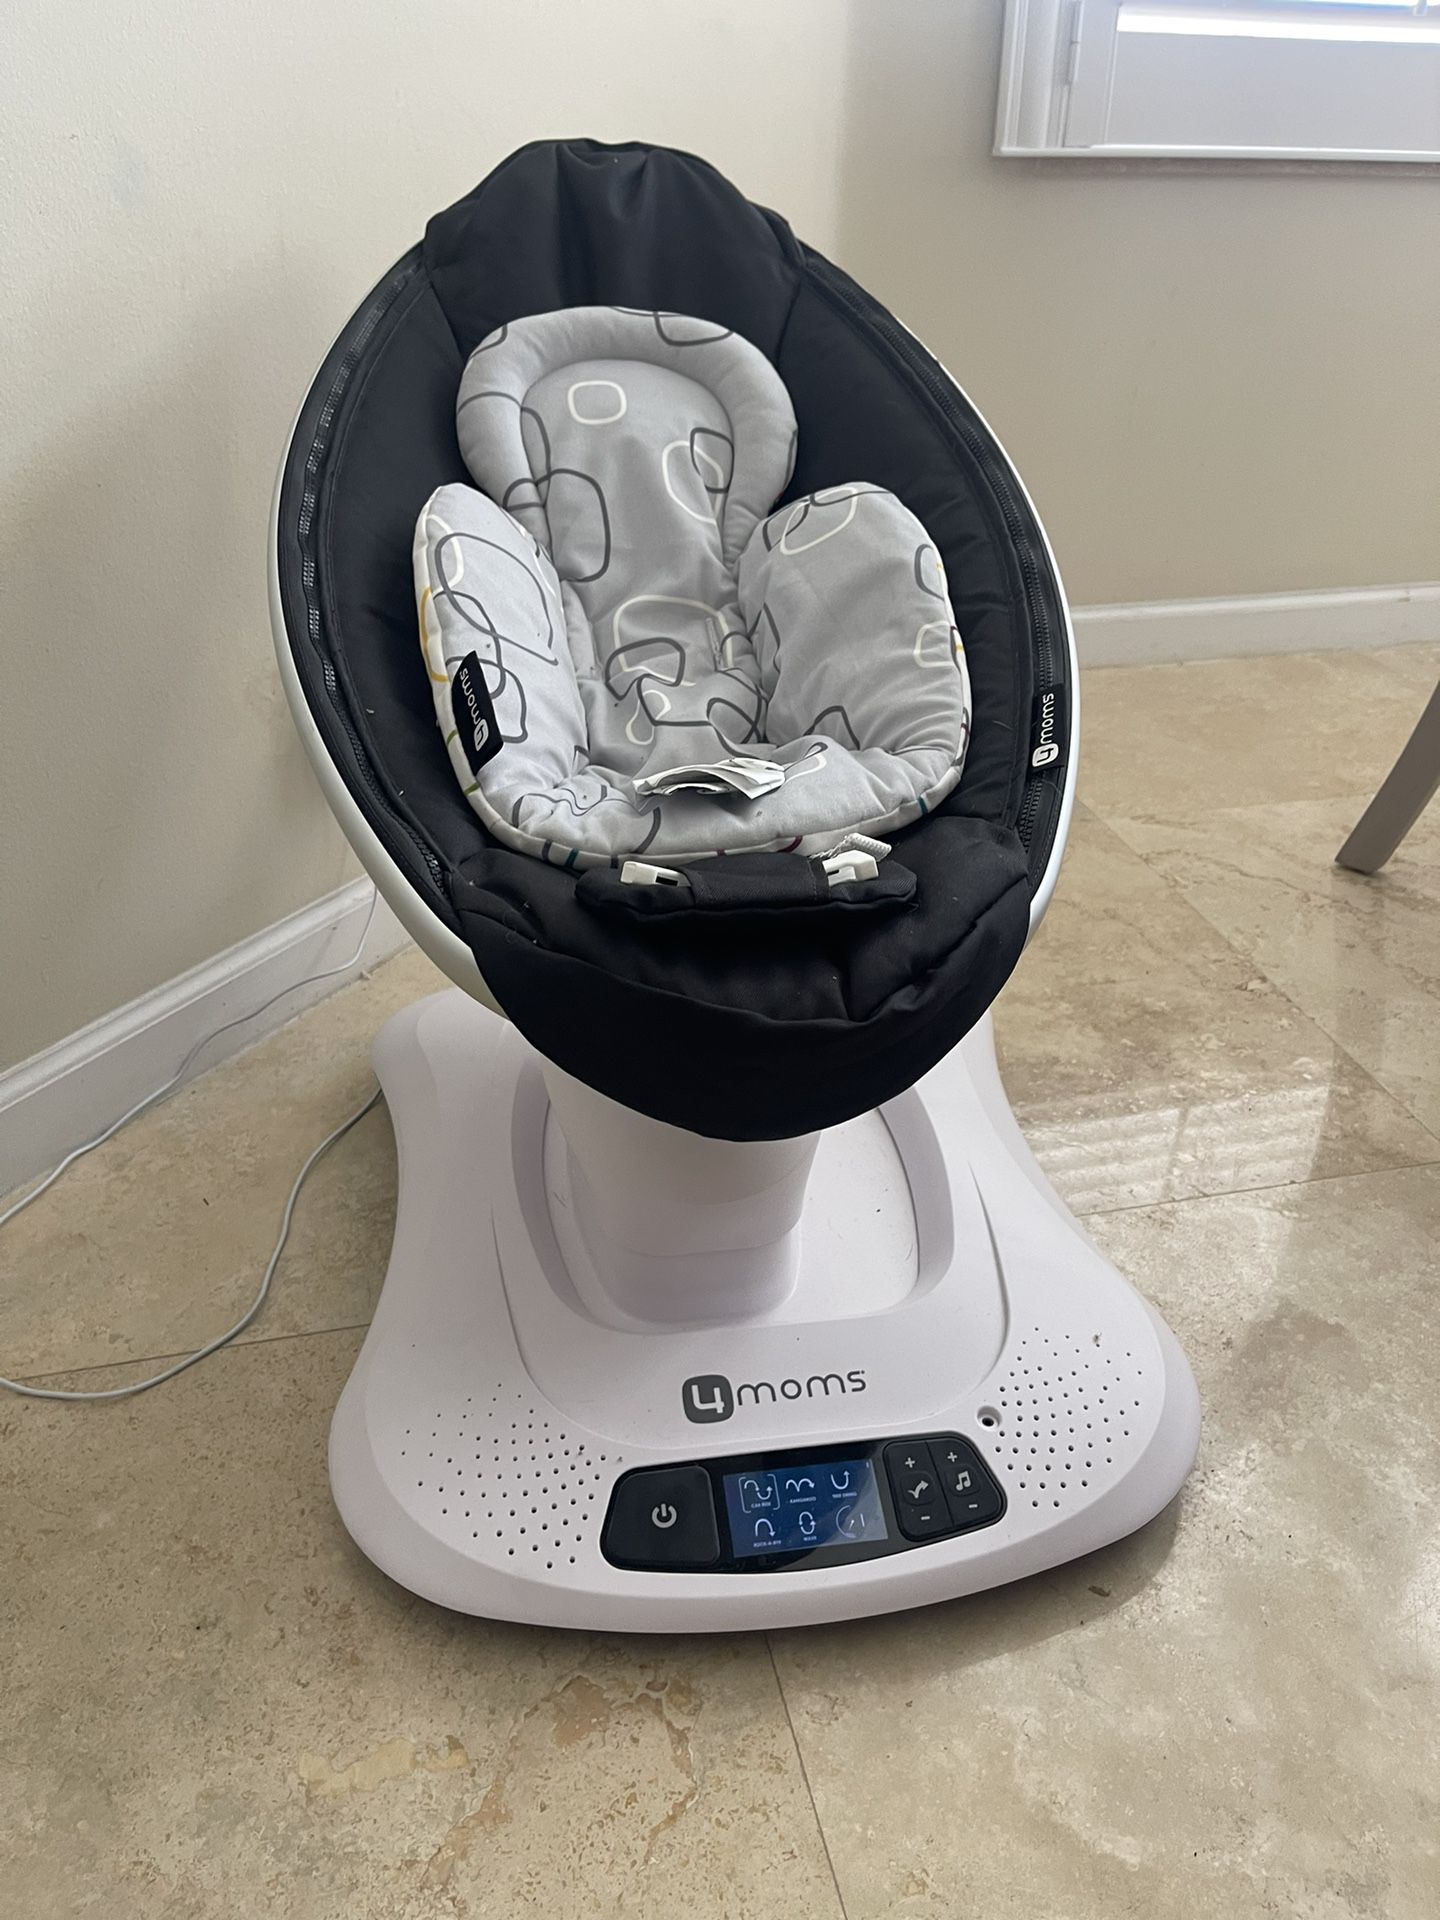 4moms Mamaroo Multi Motion Baby Swing- SUPER CLEAN- LIKE NEW 